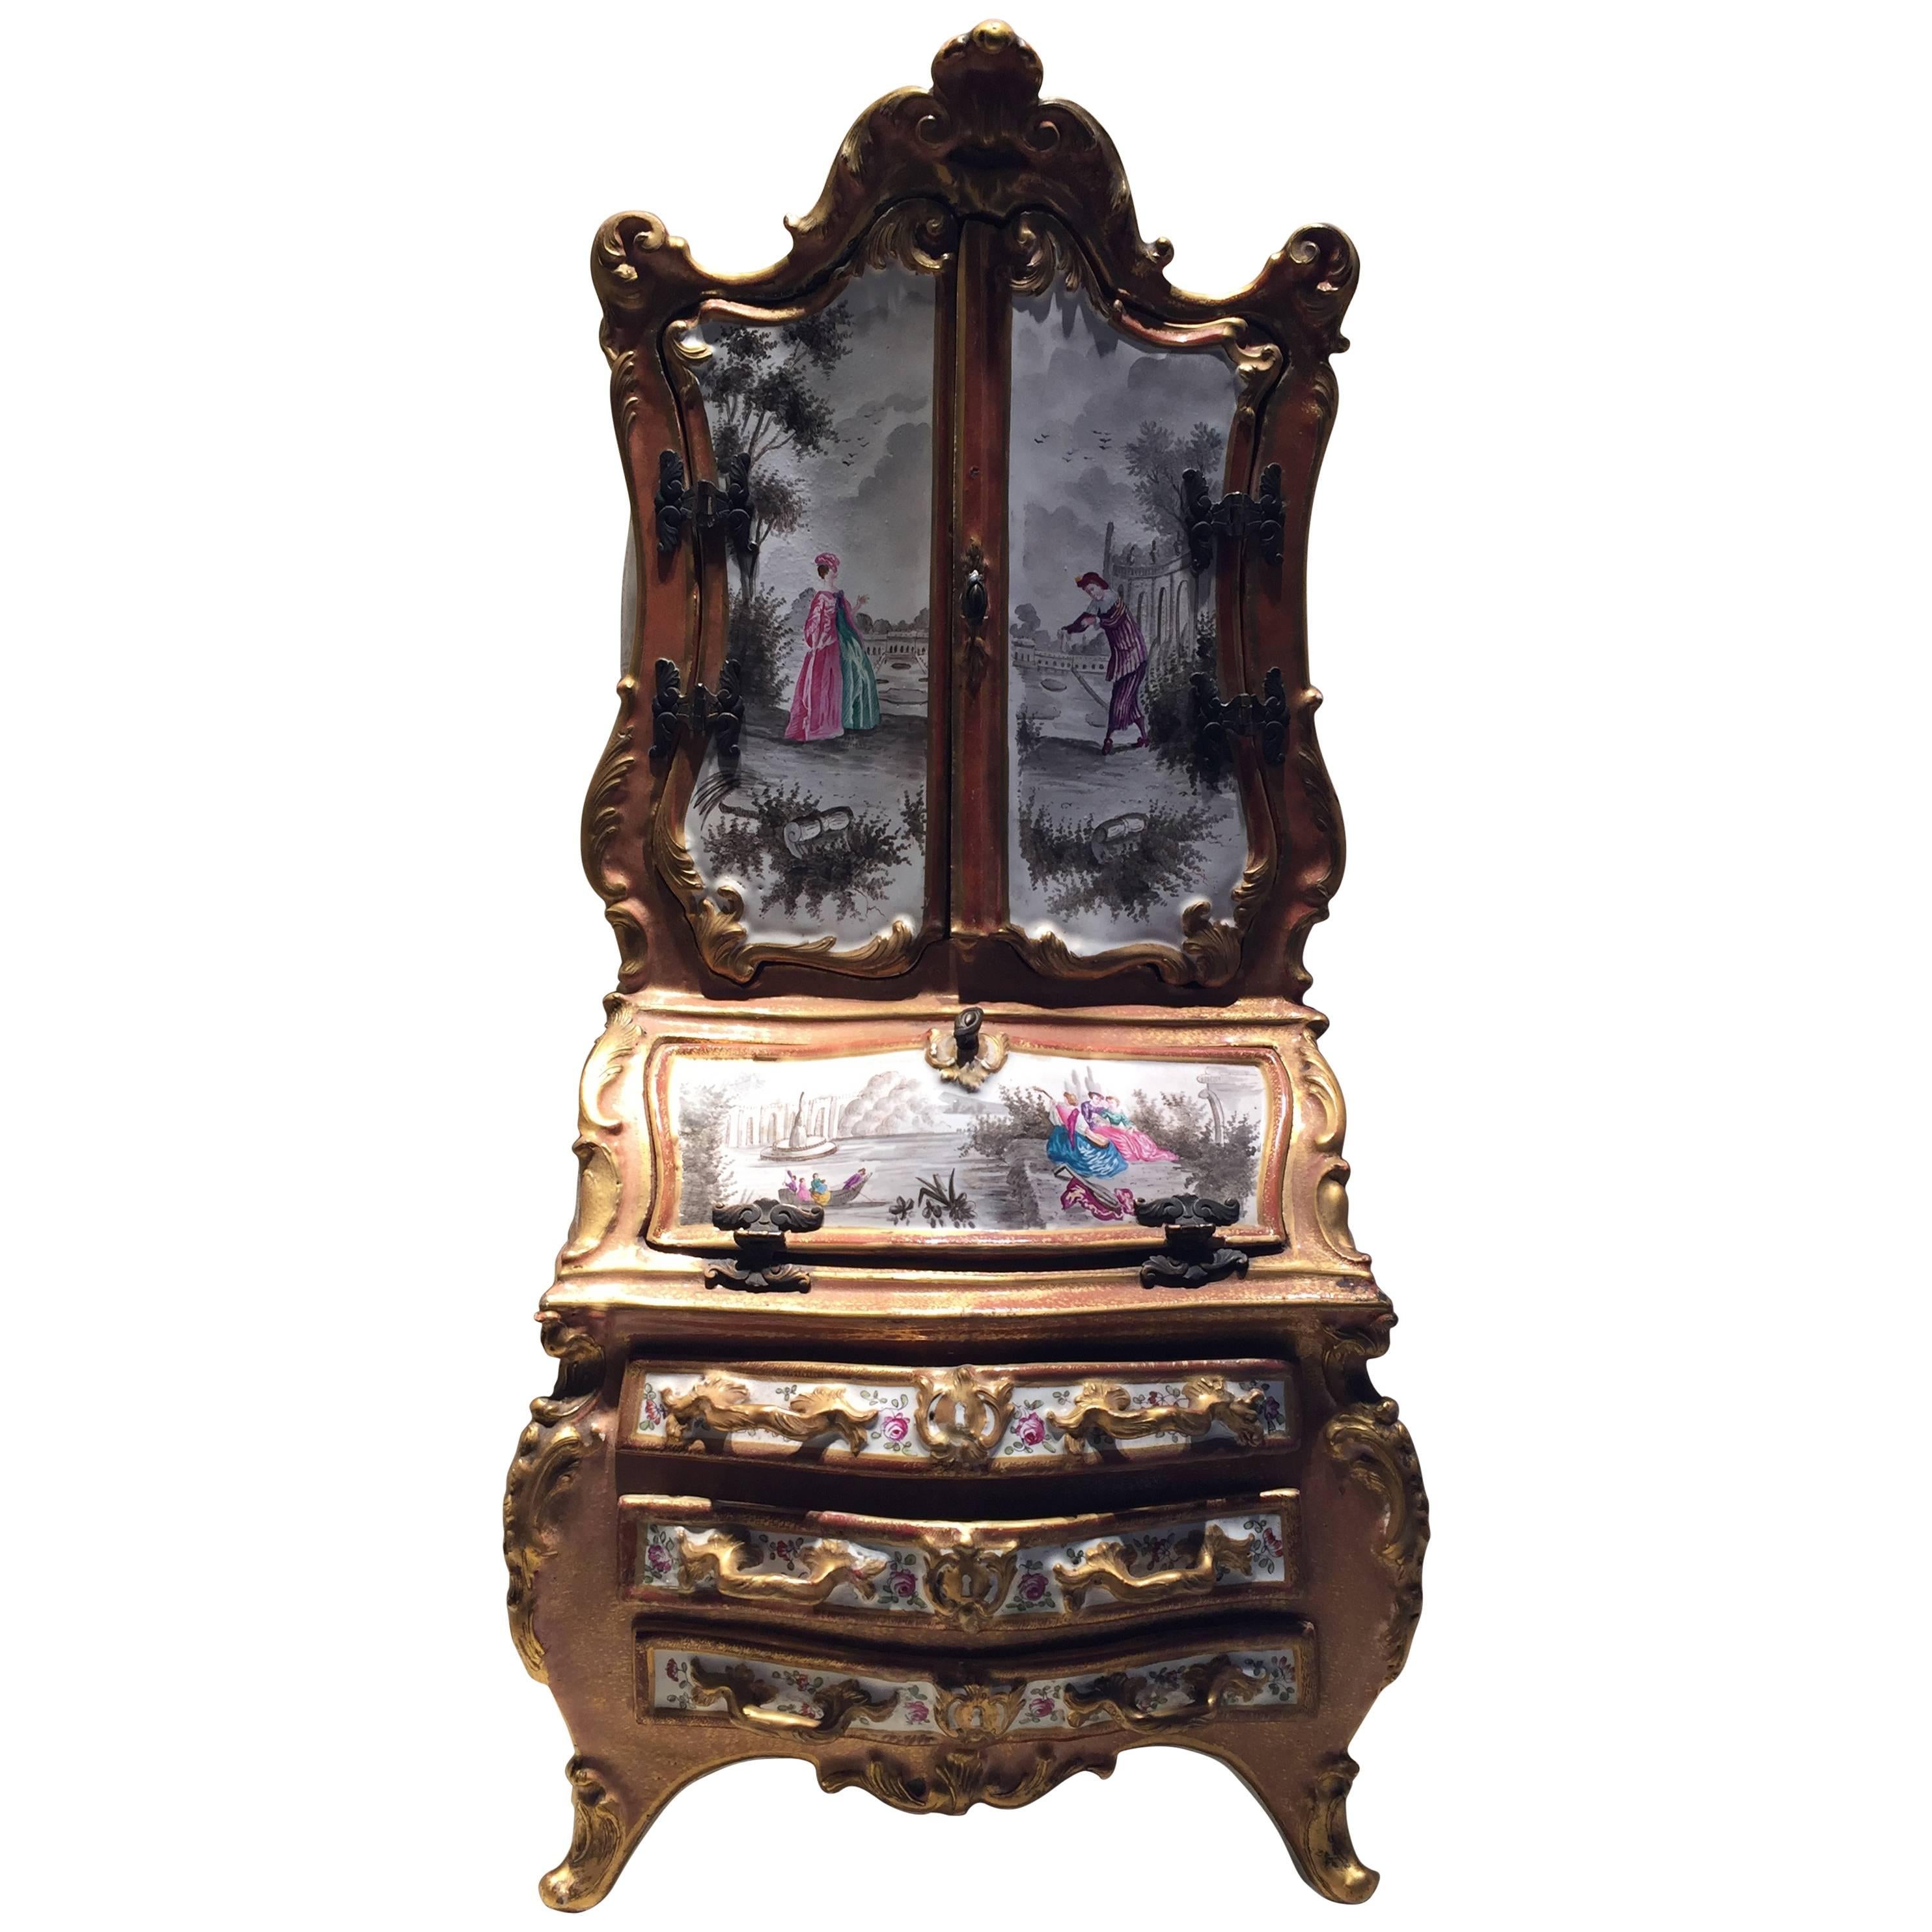 Very Rare 19th Century Porcelain Cabinet Made by Sèvres For Sale